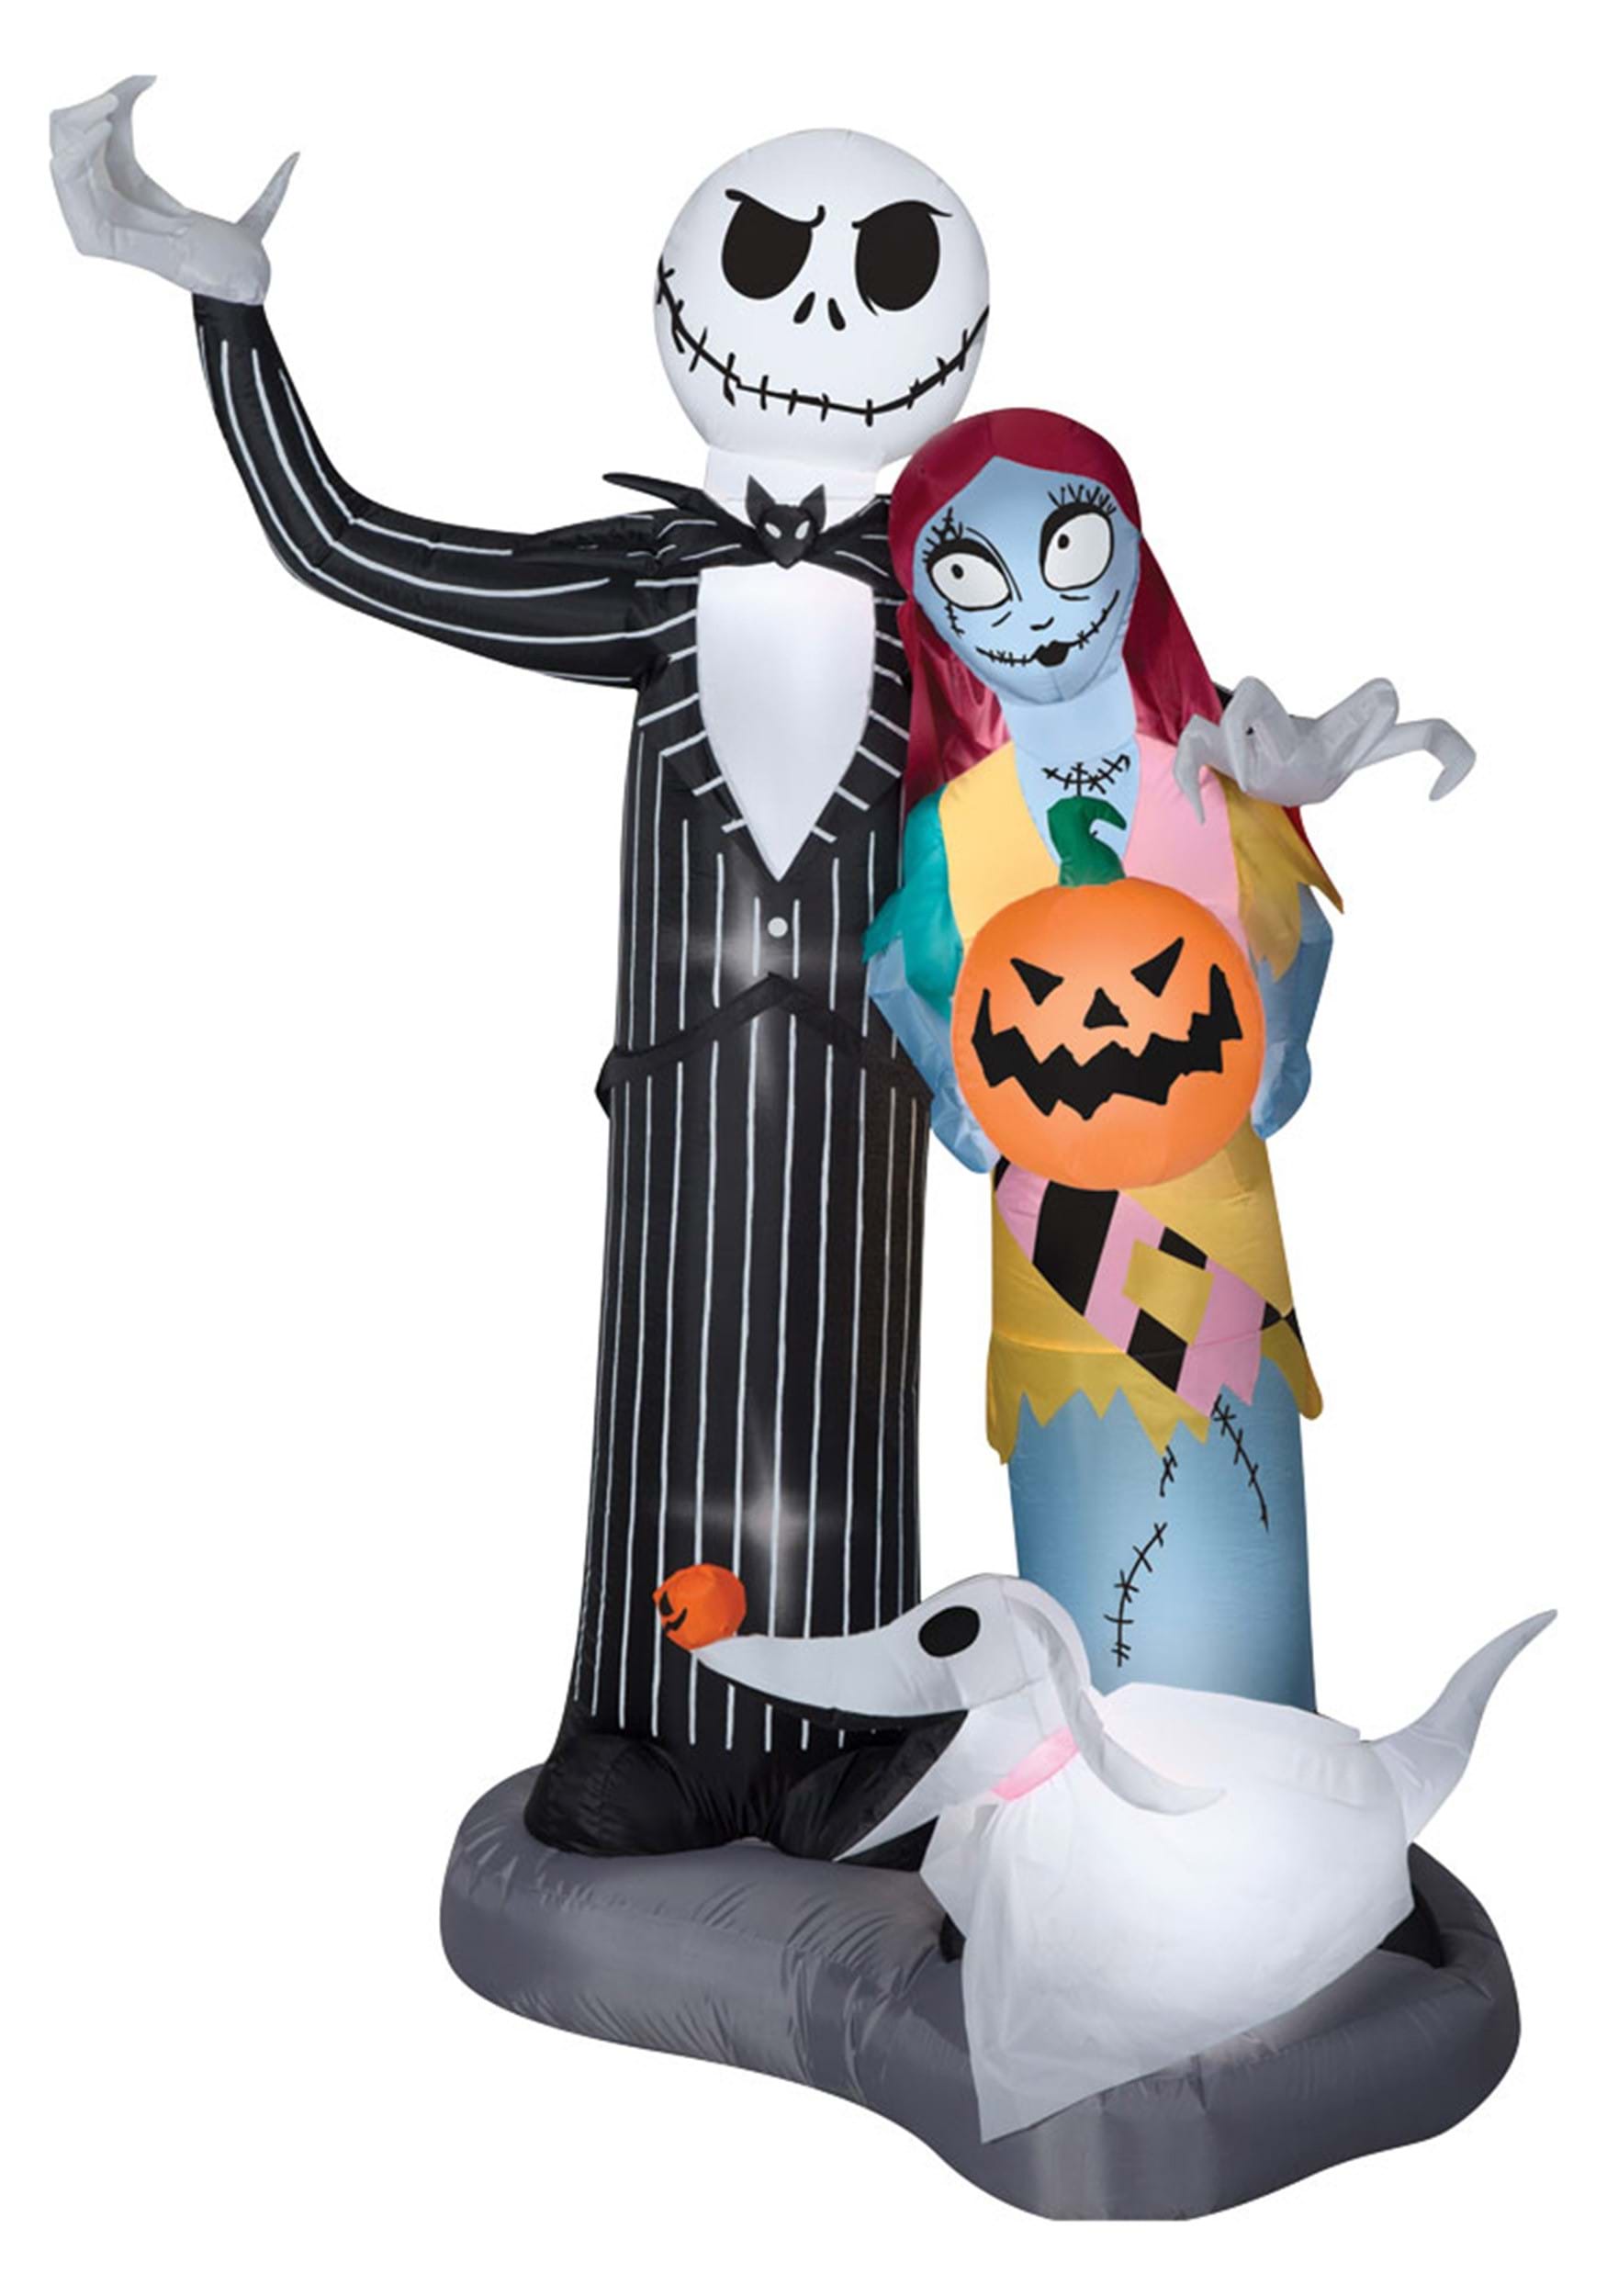 Large 6FT Airblown Nightmare Before Christmas Scene Prop